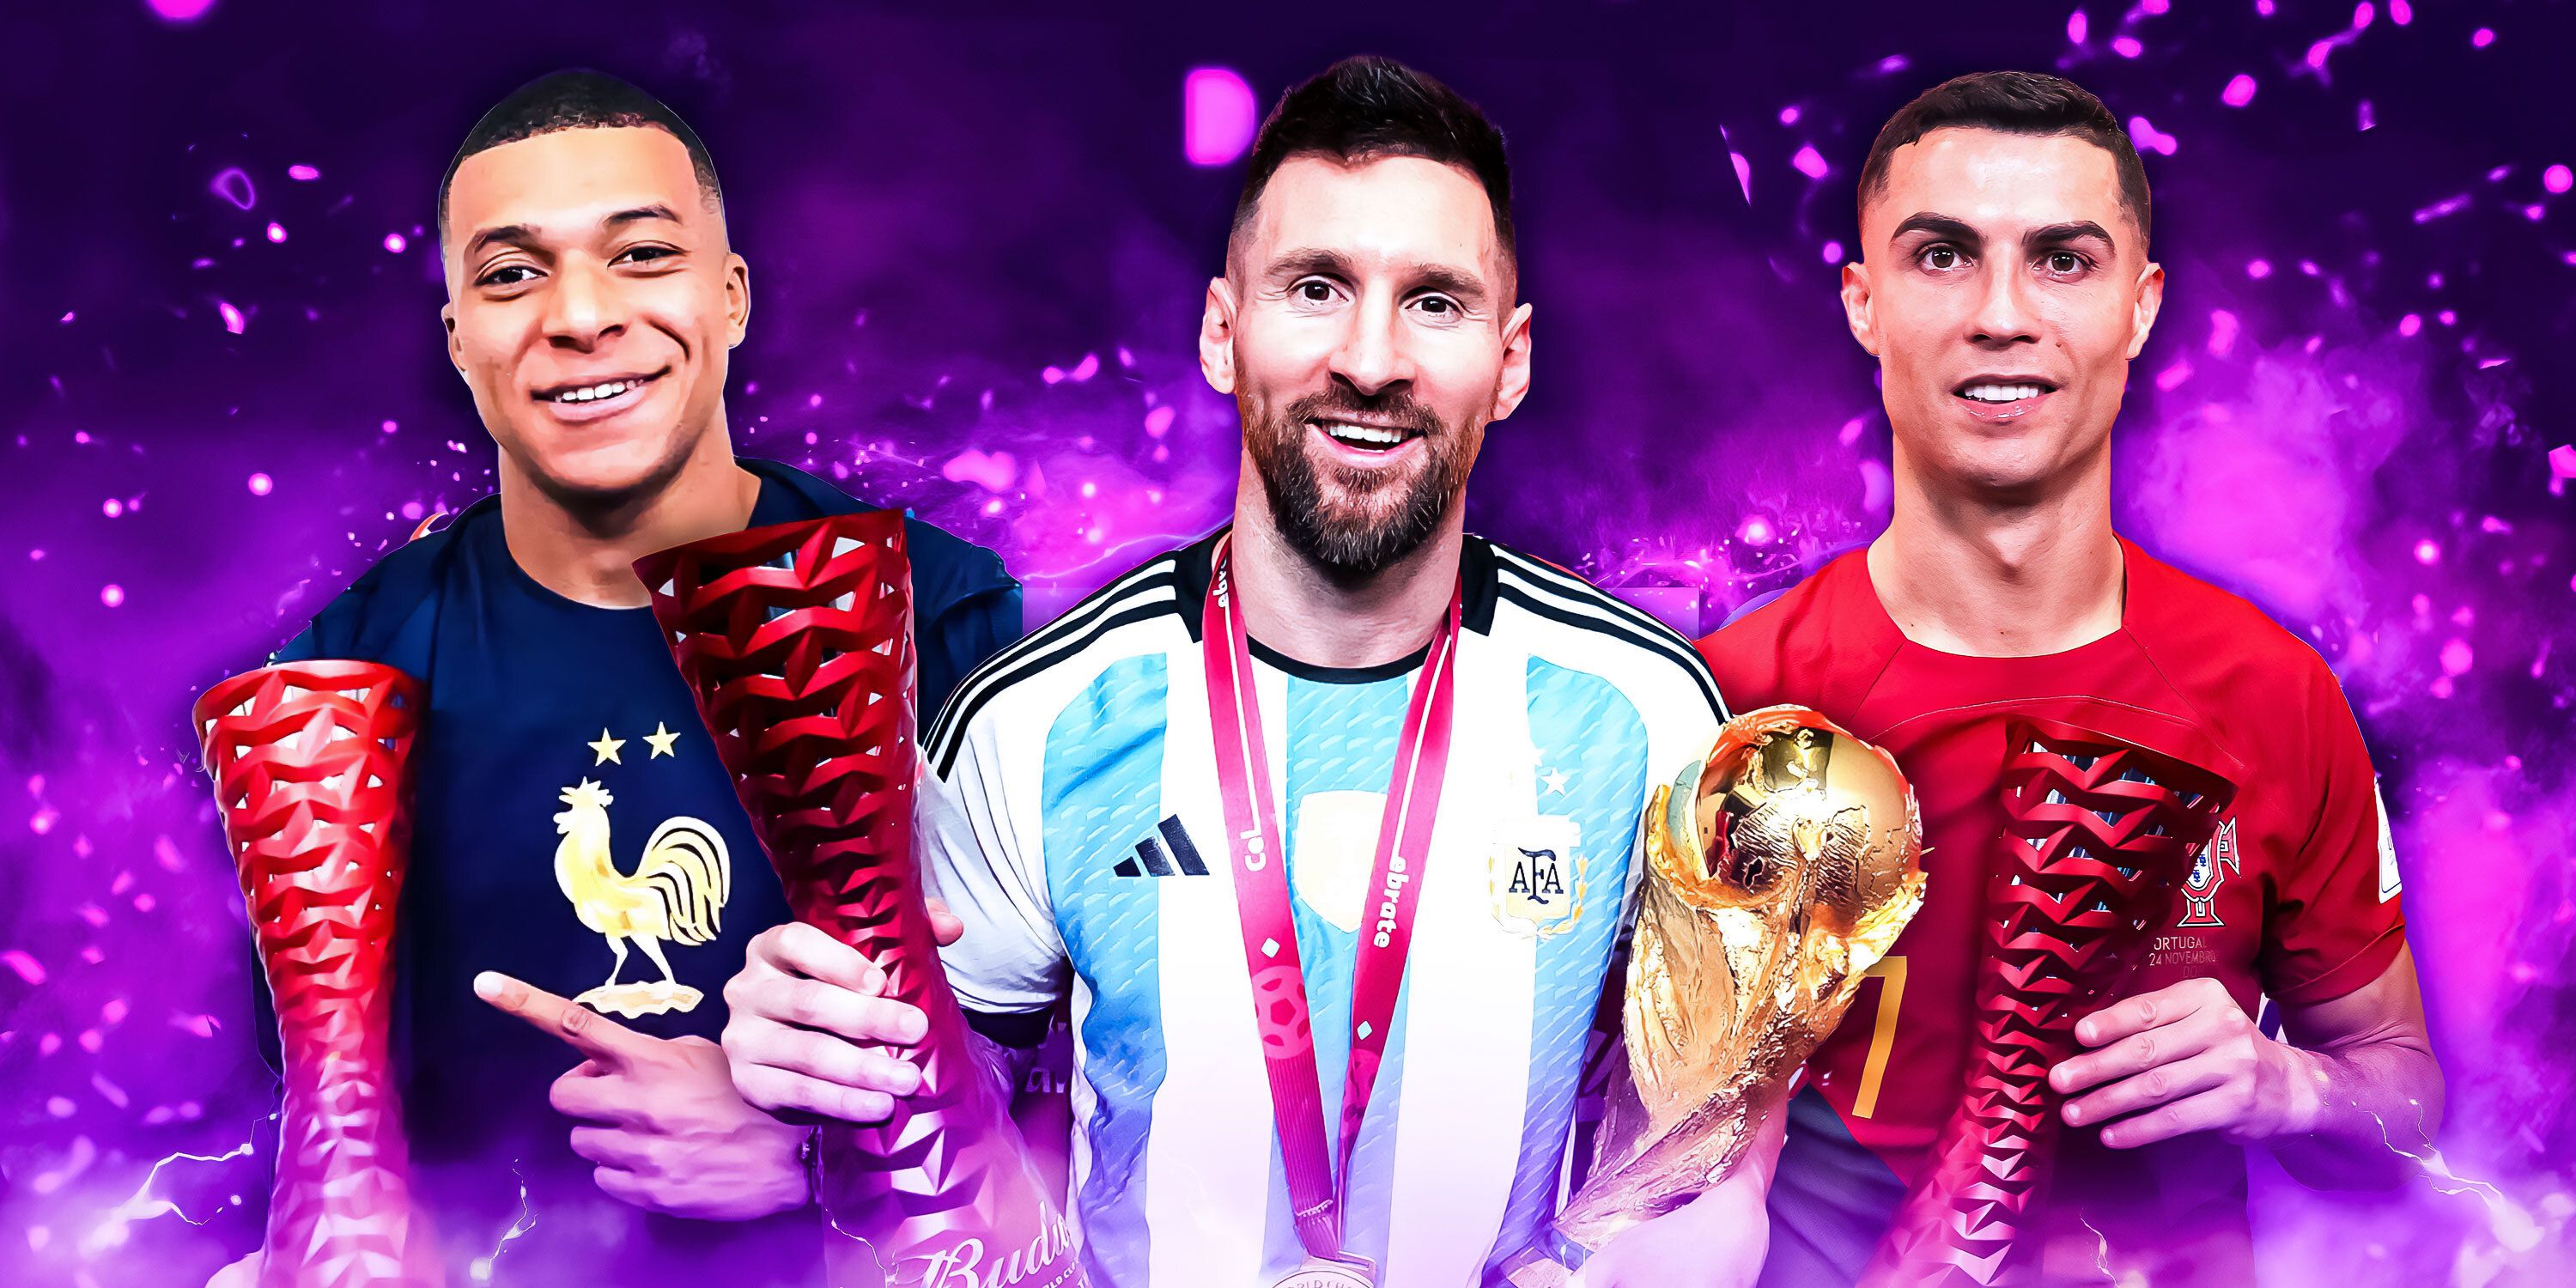 A custom image of Kylian Mbappe, Lionel Messi and Cristiano Ronaldo